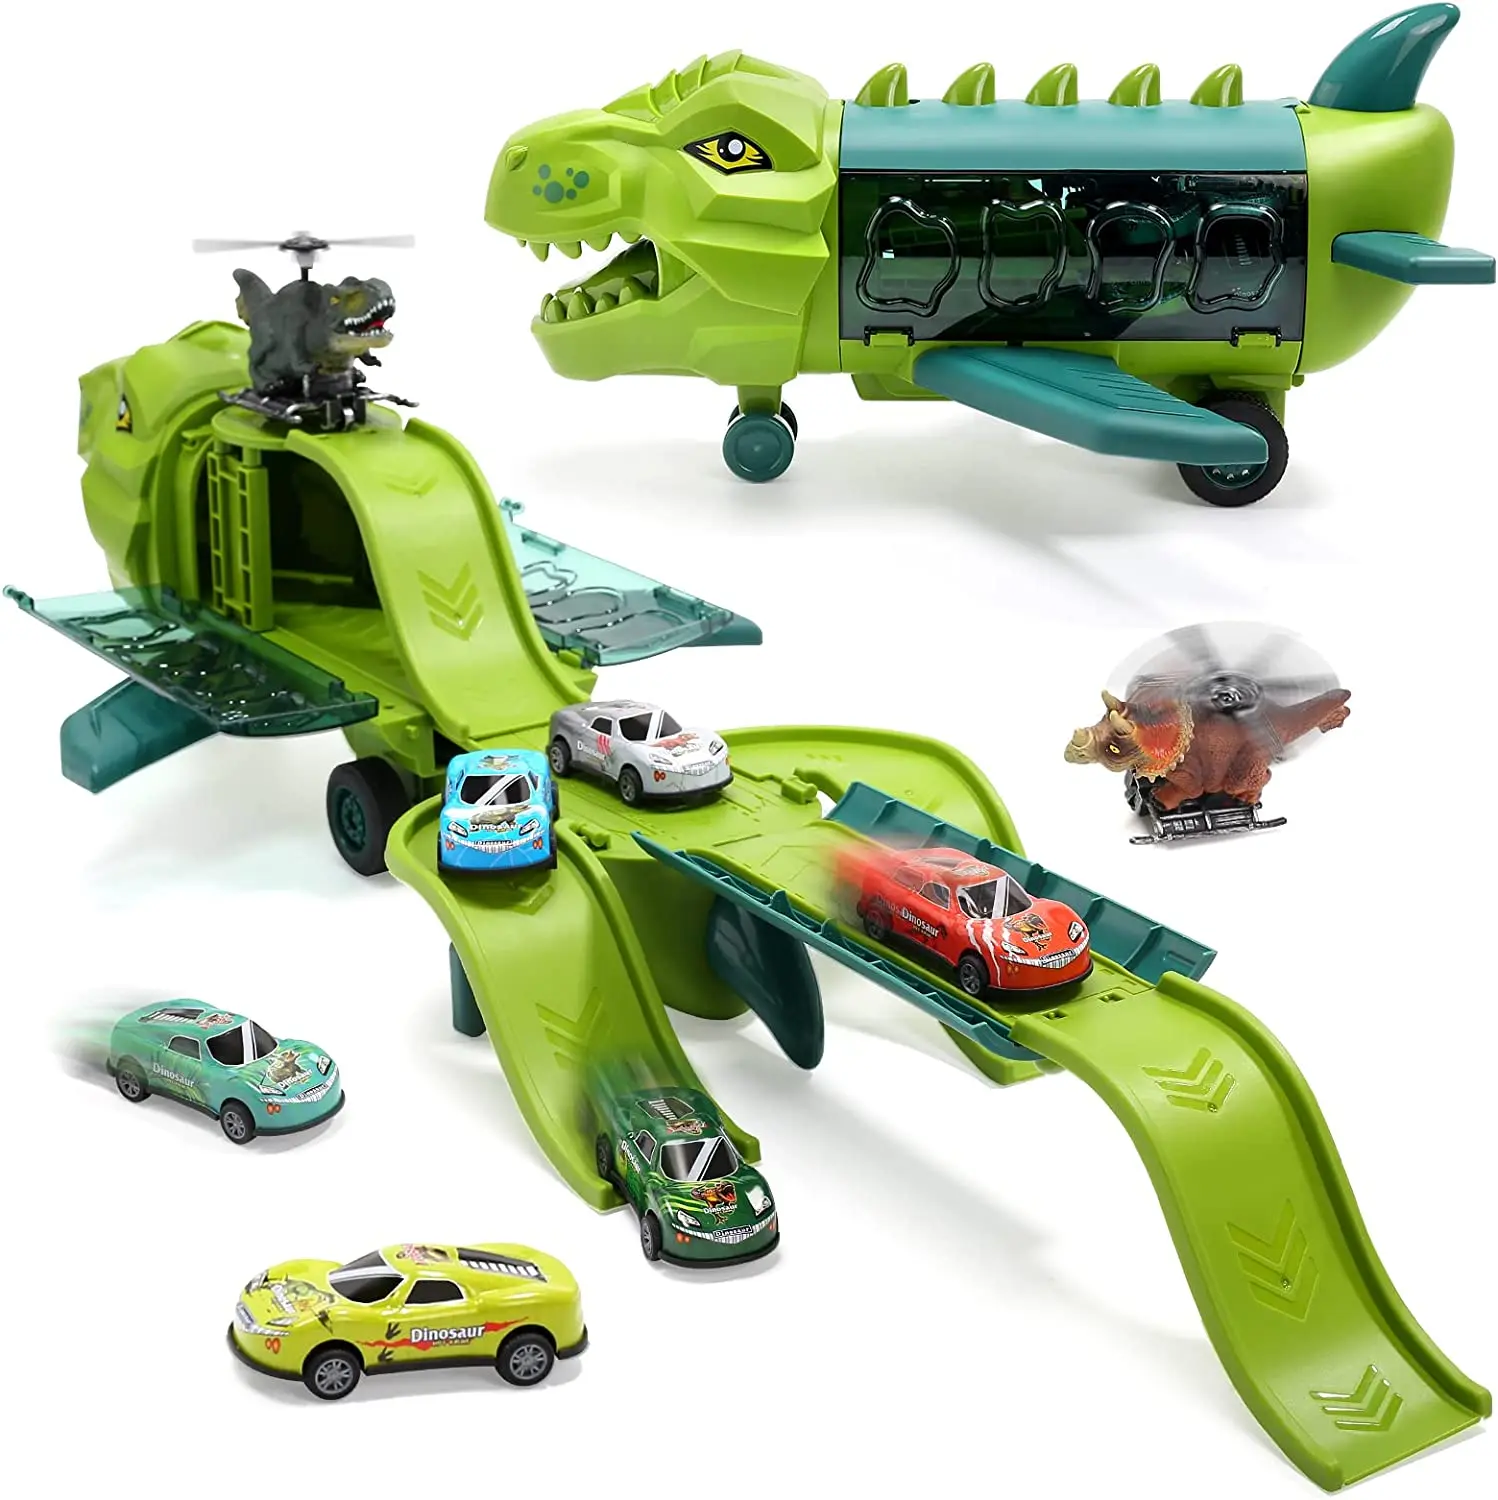 

Dinosaur Airplane Toys for Kids Tracks Transport Plane Toy Dino Helicopter Vehicles and Mini Race Cars Storage Play Set Gift Kid